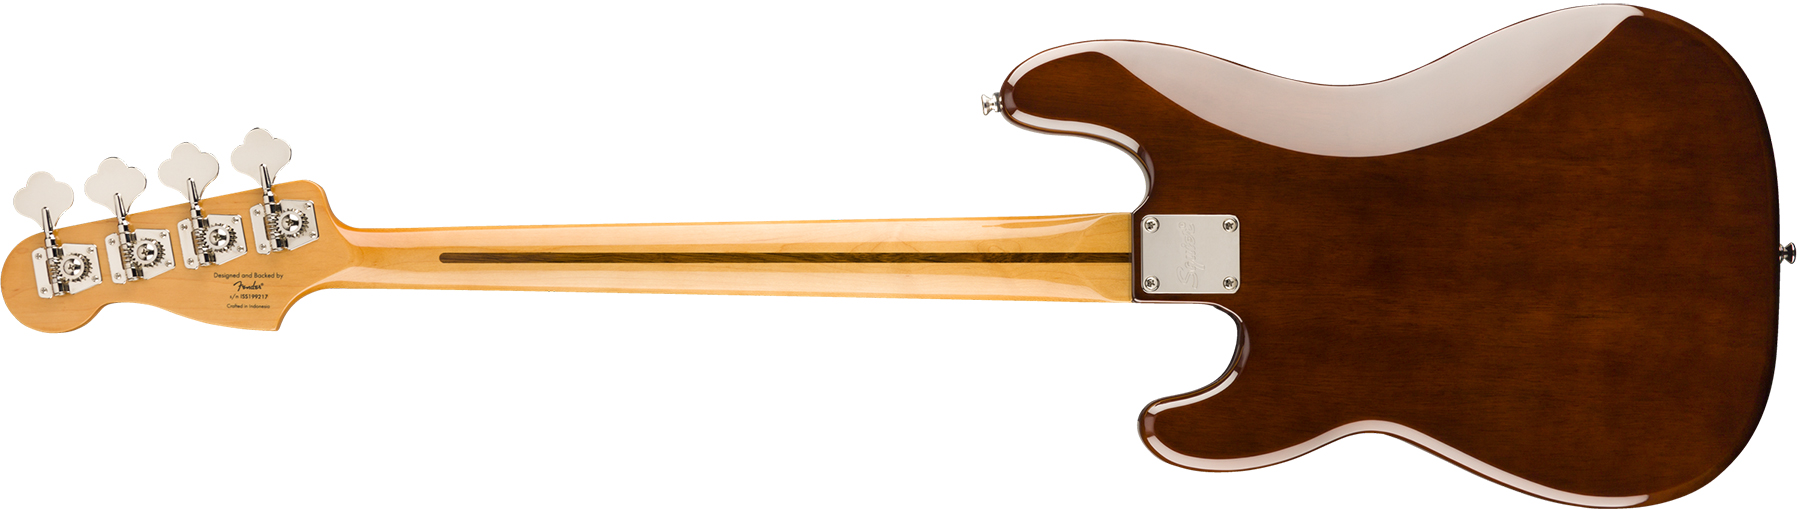 Squier Precision Bass '70s Classic Vibe 2019 Mn - Walnut - Solid body electric bass - Variation 1